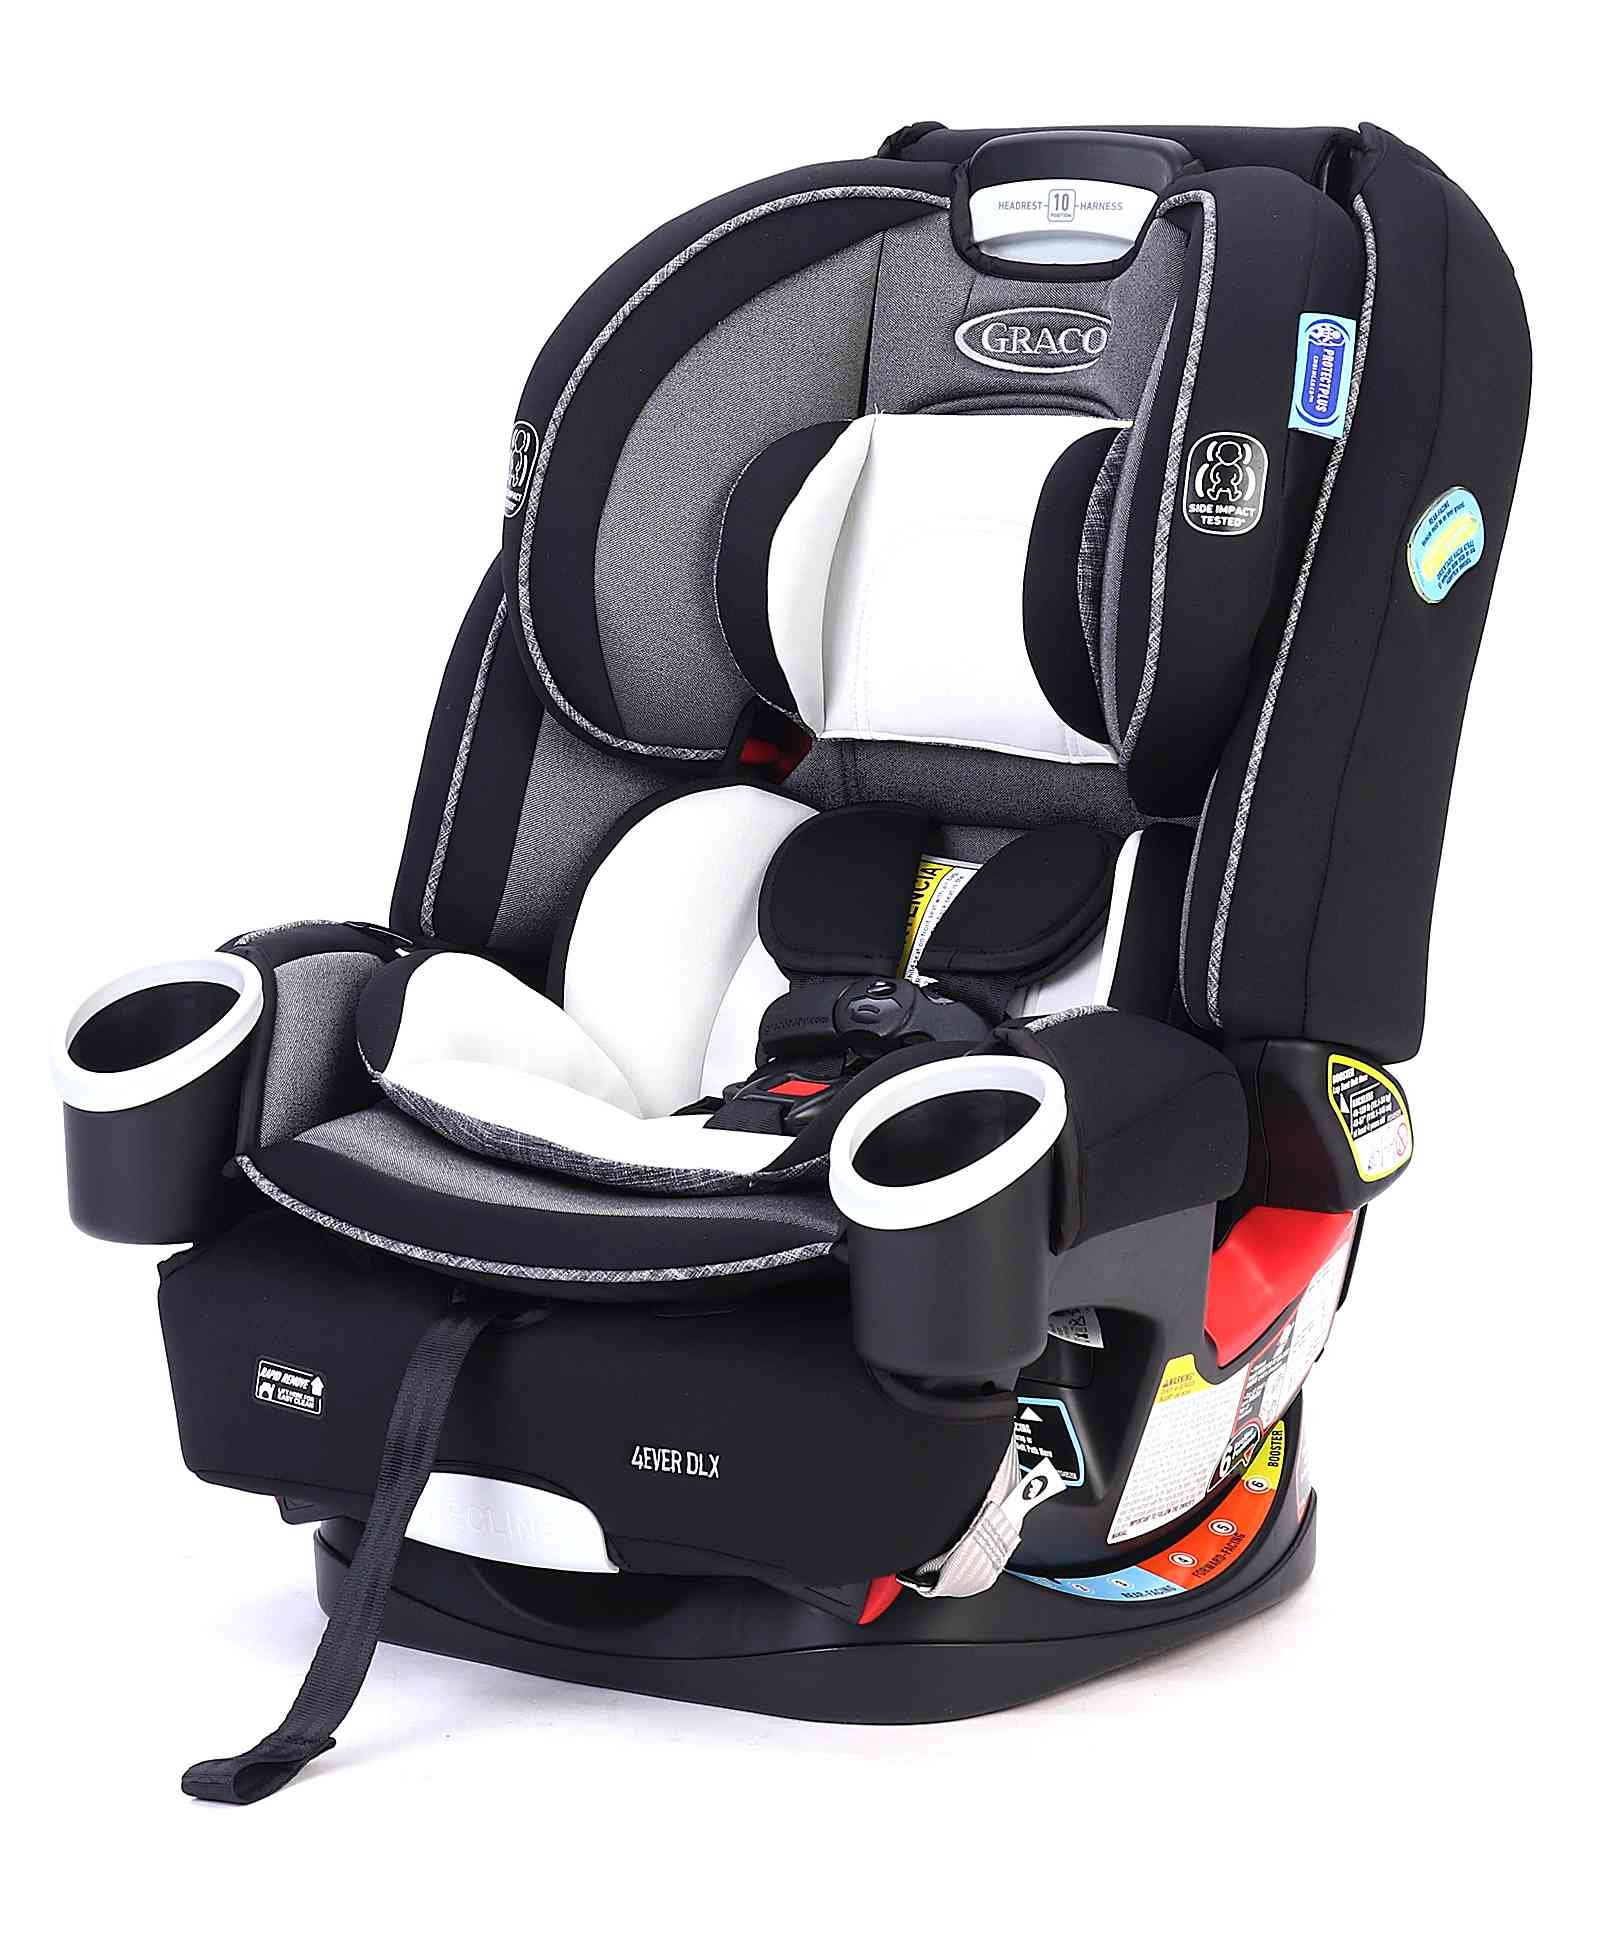 Graco 4ever Dlx 4 In 1 Convertible Infant Car Seat Fairmont Black Online In India Buy At Best Price From Firstcry Com 291